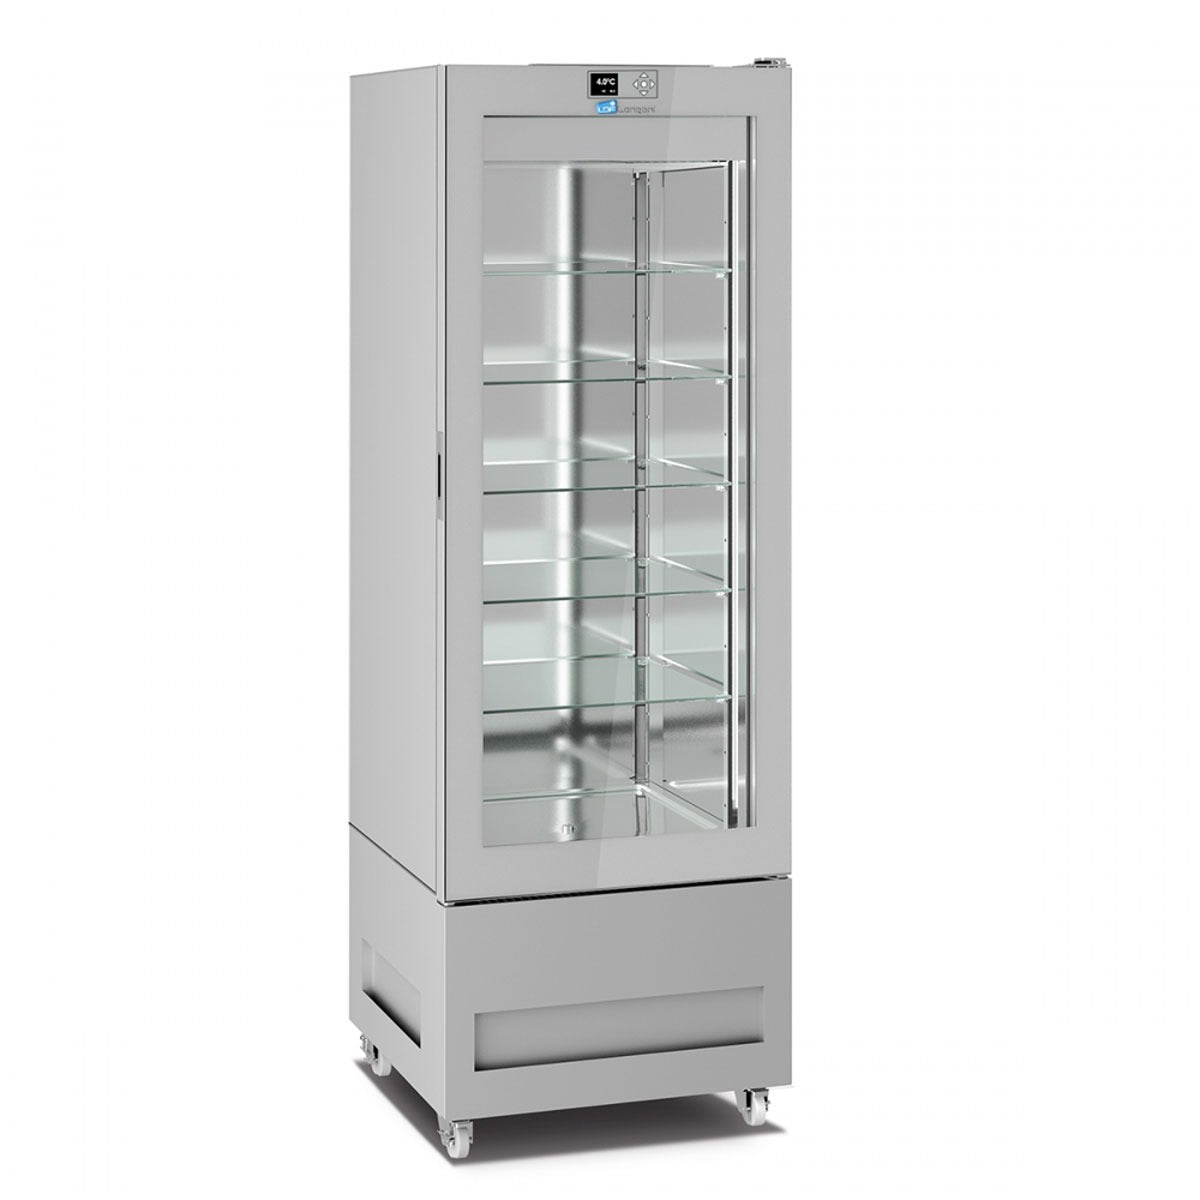 Positive refrigerated display case for pastry and ice cream, 450 liters